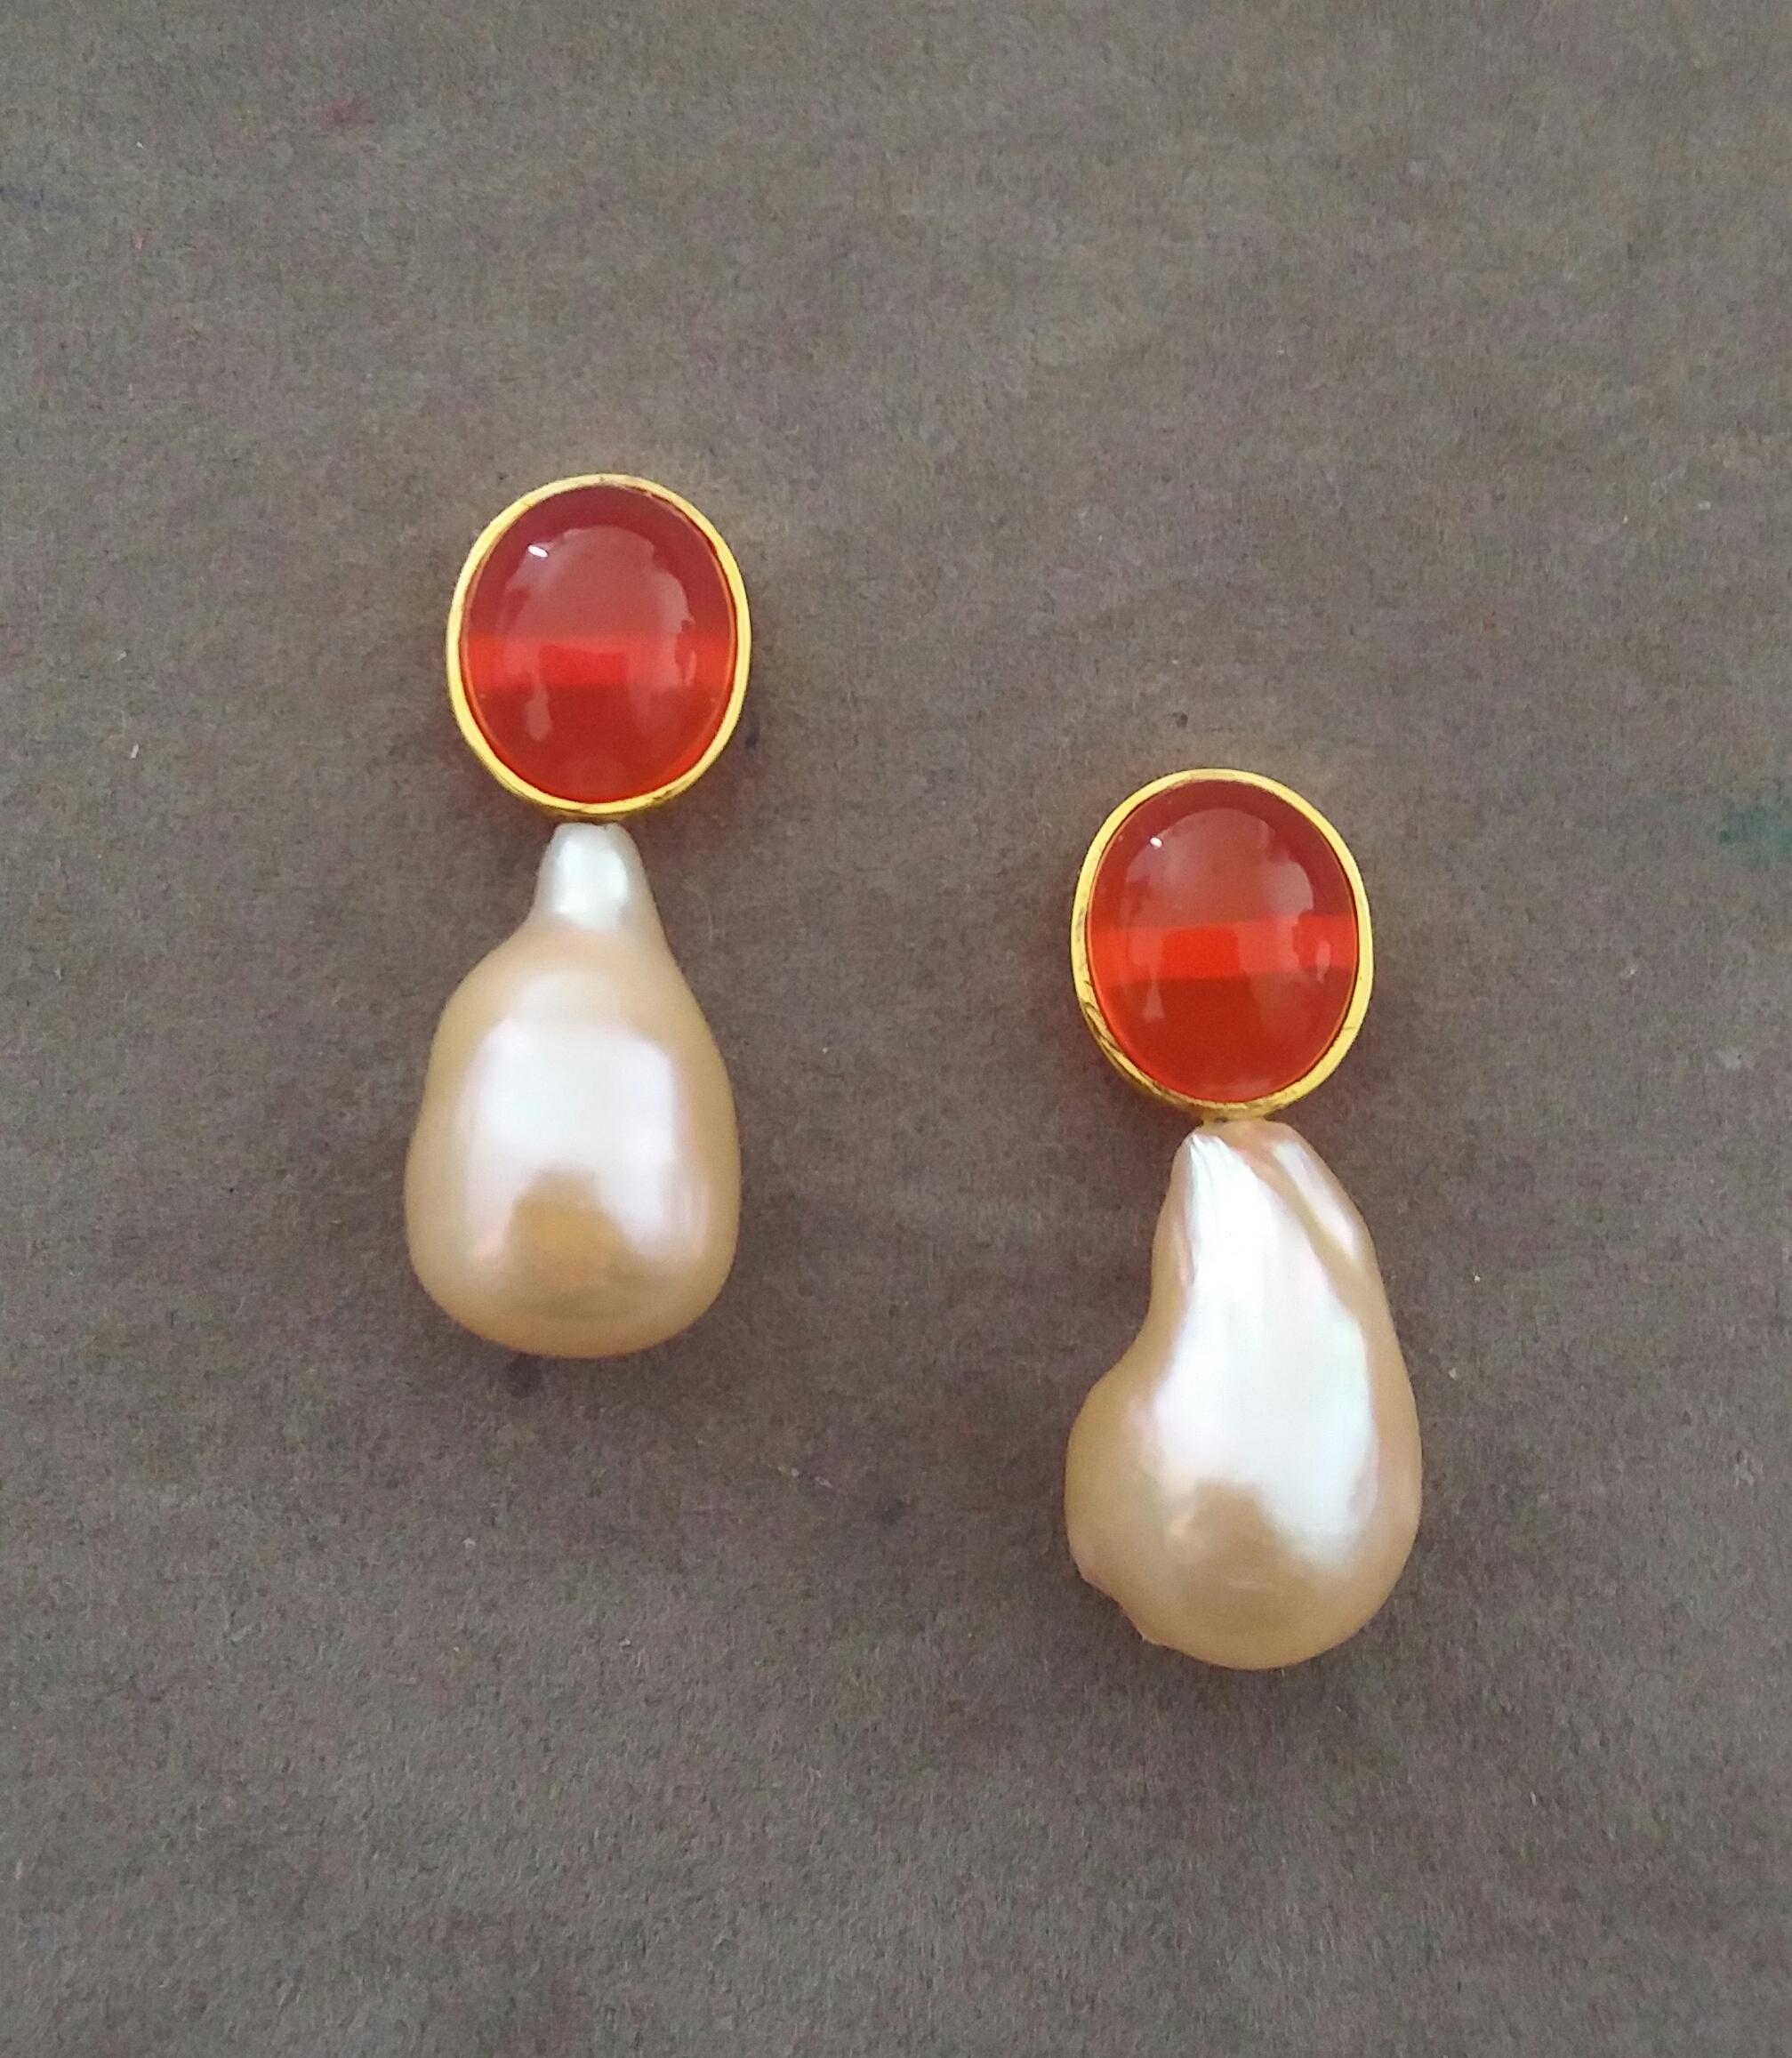 These simple but elegant and completely handmade earrings have 2 Oval Fire Opal Cabochons measuring 10 x 12 mm set in 14 K yellow gold bezel at the top to which are suspended 2  Pear Shape Baroque Cream Pearls measuring 12x20 mm.

In 1978 our